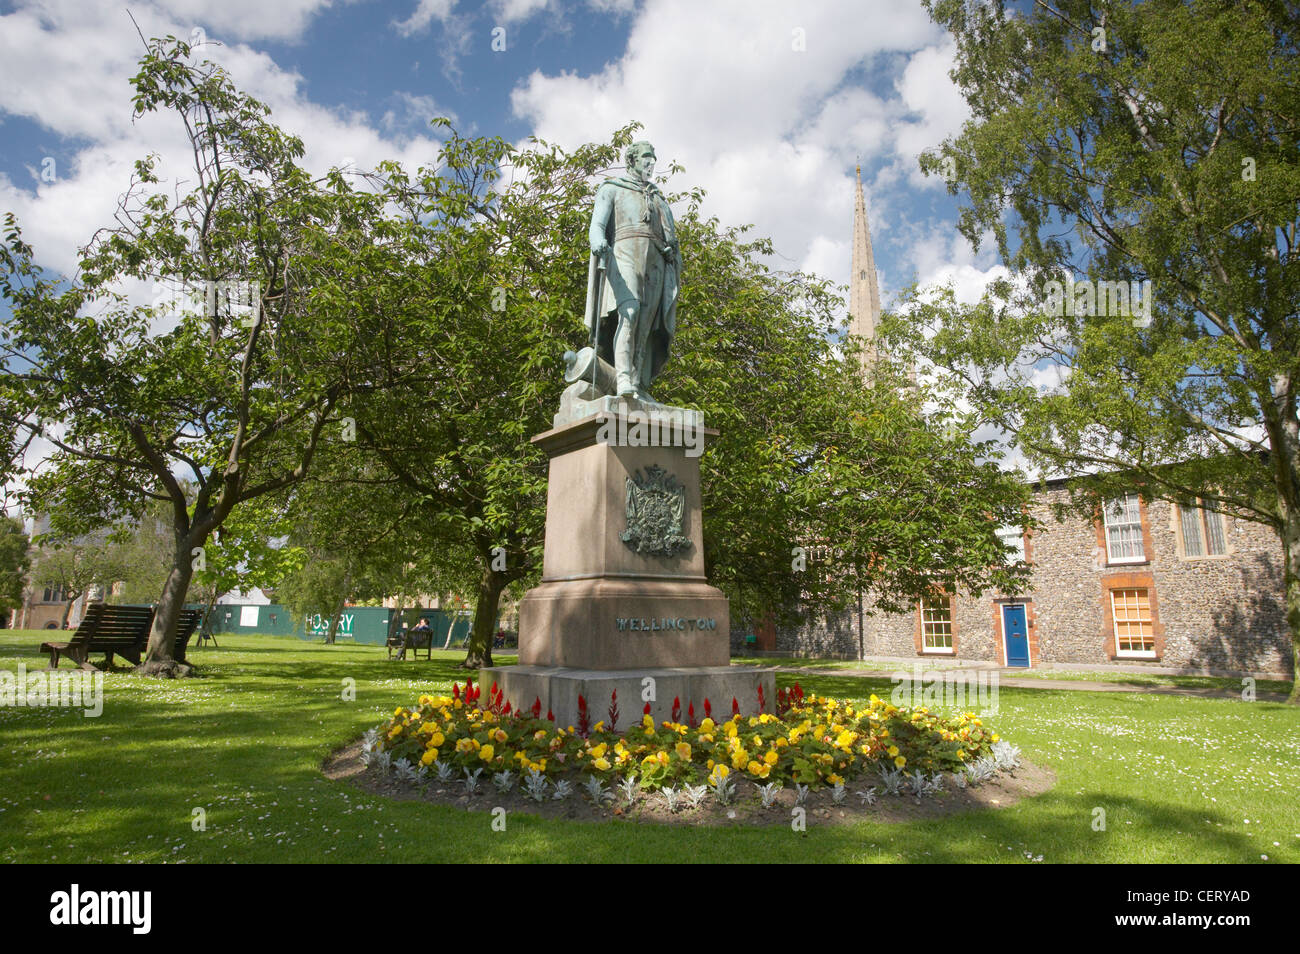 A statue of the Duke of Wellington in the grounds of Norwich Cathedral. Stock Photo